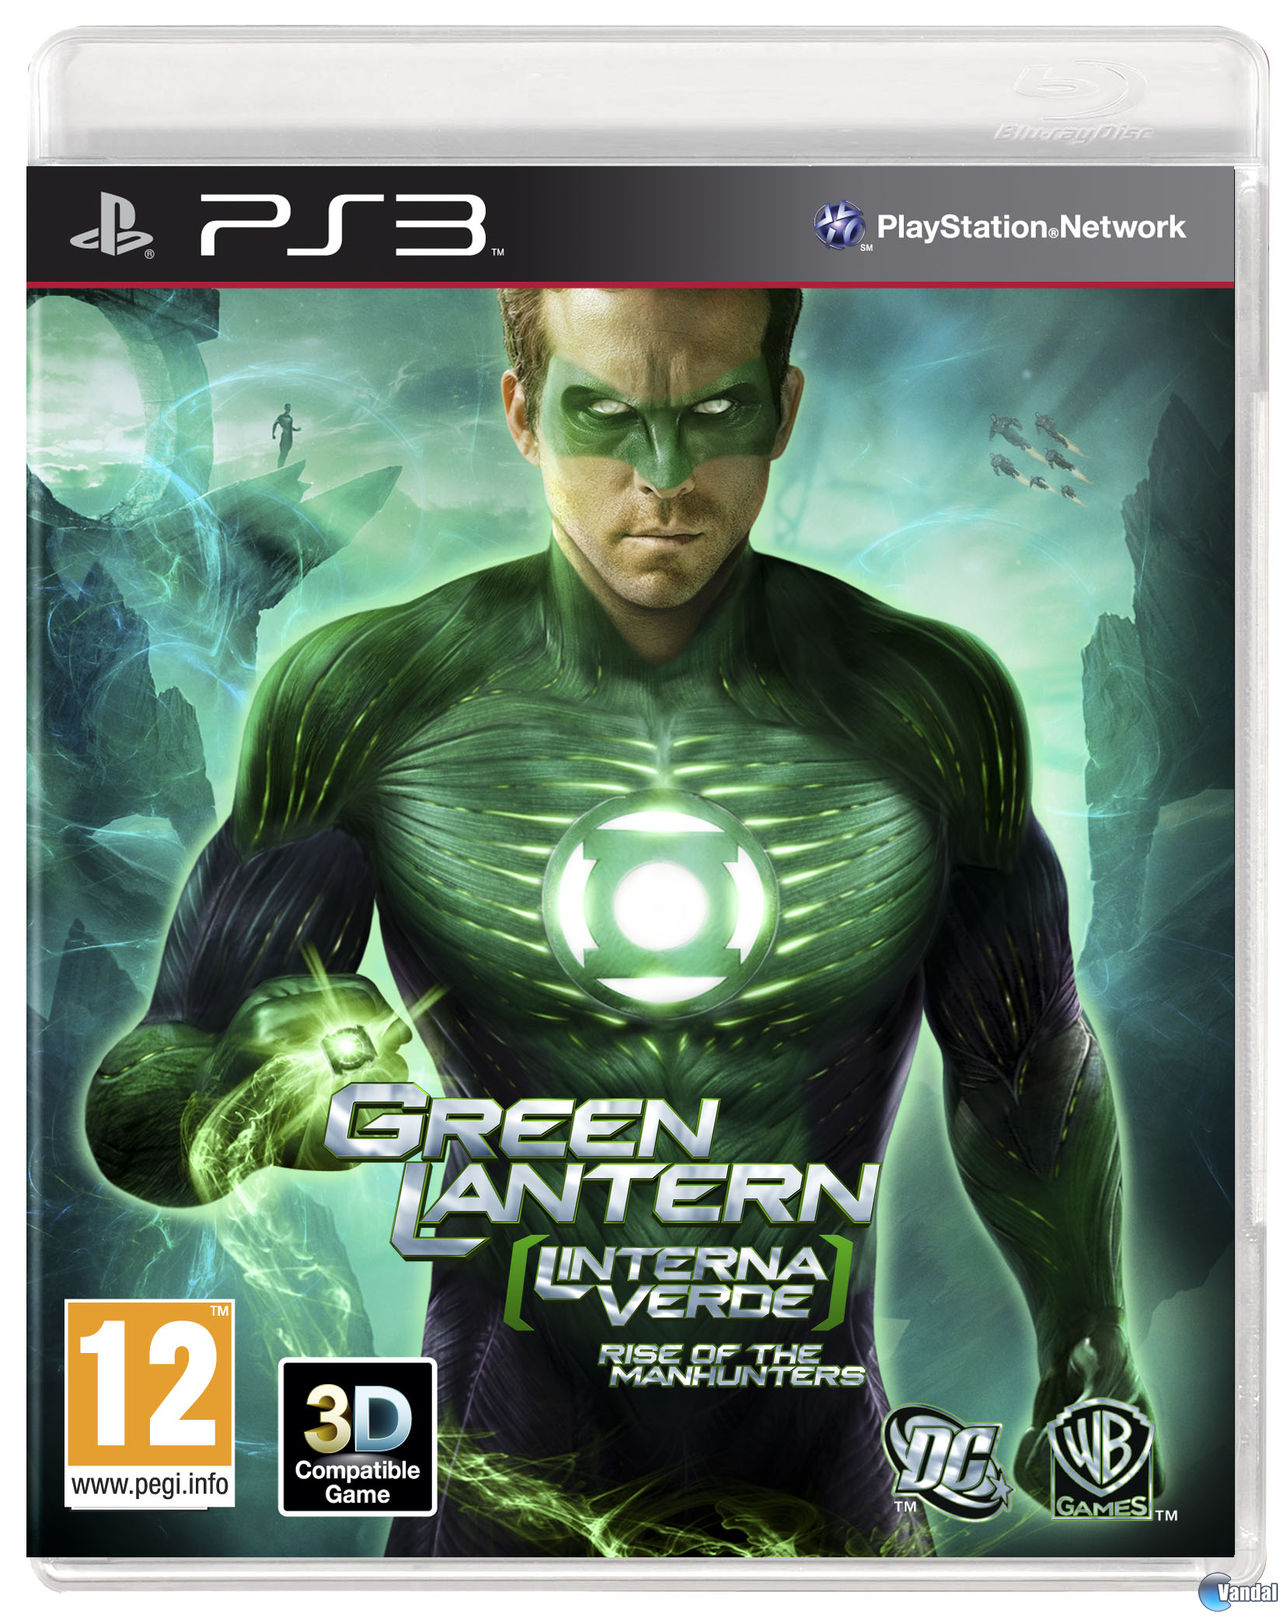 Miniatura mueble enfermero Green Lantern: Rise of the Manhunters - Videojuego (PS3, Xbox 360, NDS,  Nintendo 3DS y Wii) - Vandal